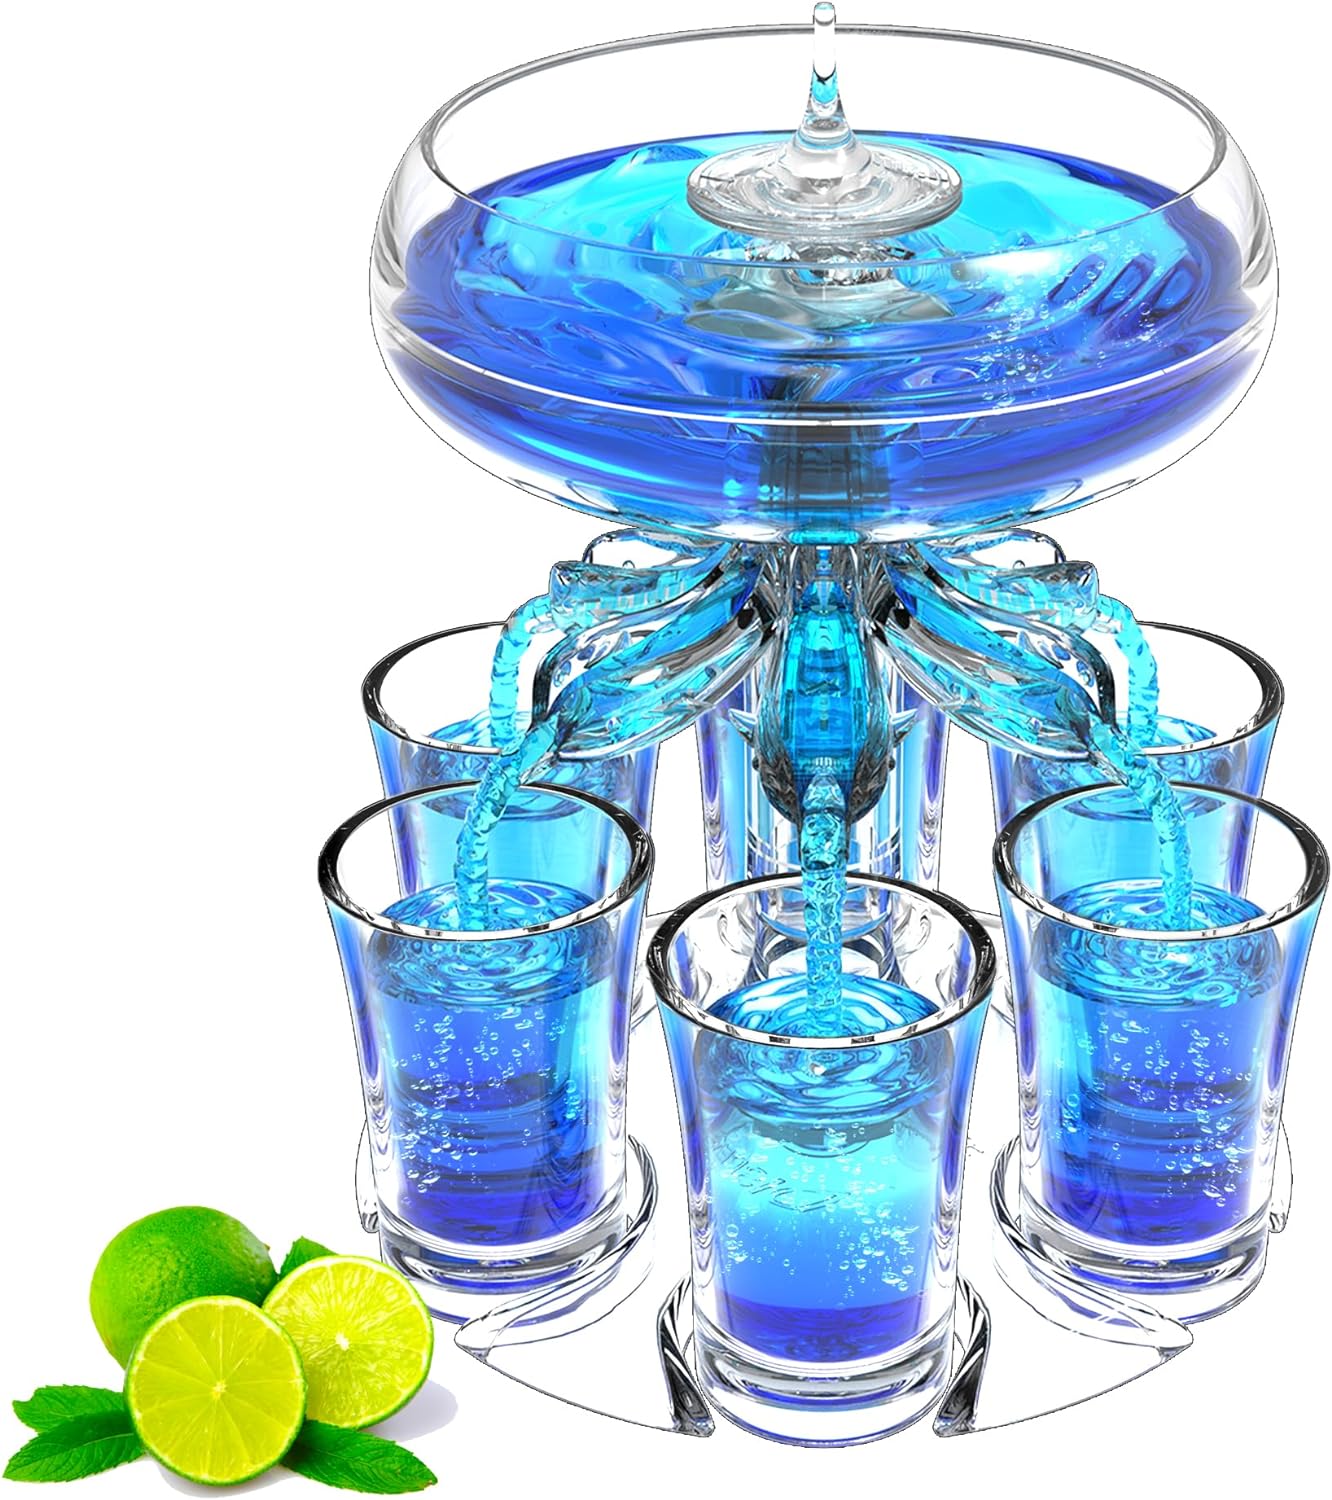 MOKOQI Shot Glasses Party Drink Dispenser with 6 Shot Glasses Set Liquid Beverage Liquor Drinking Fountains for Parties on Birthday Wedding Holiday Fun Bar Restaurants Accessories Home Gifts